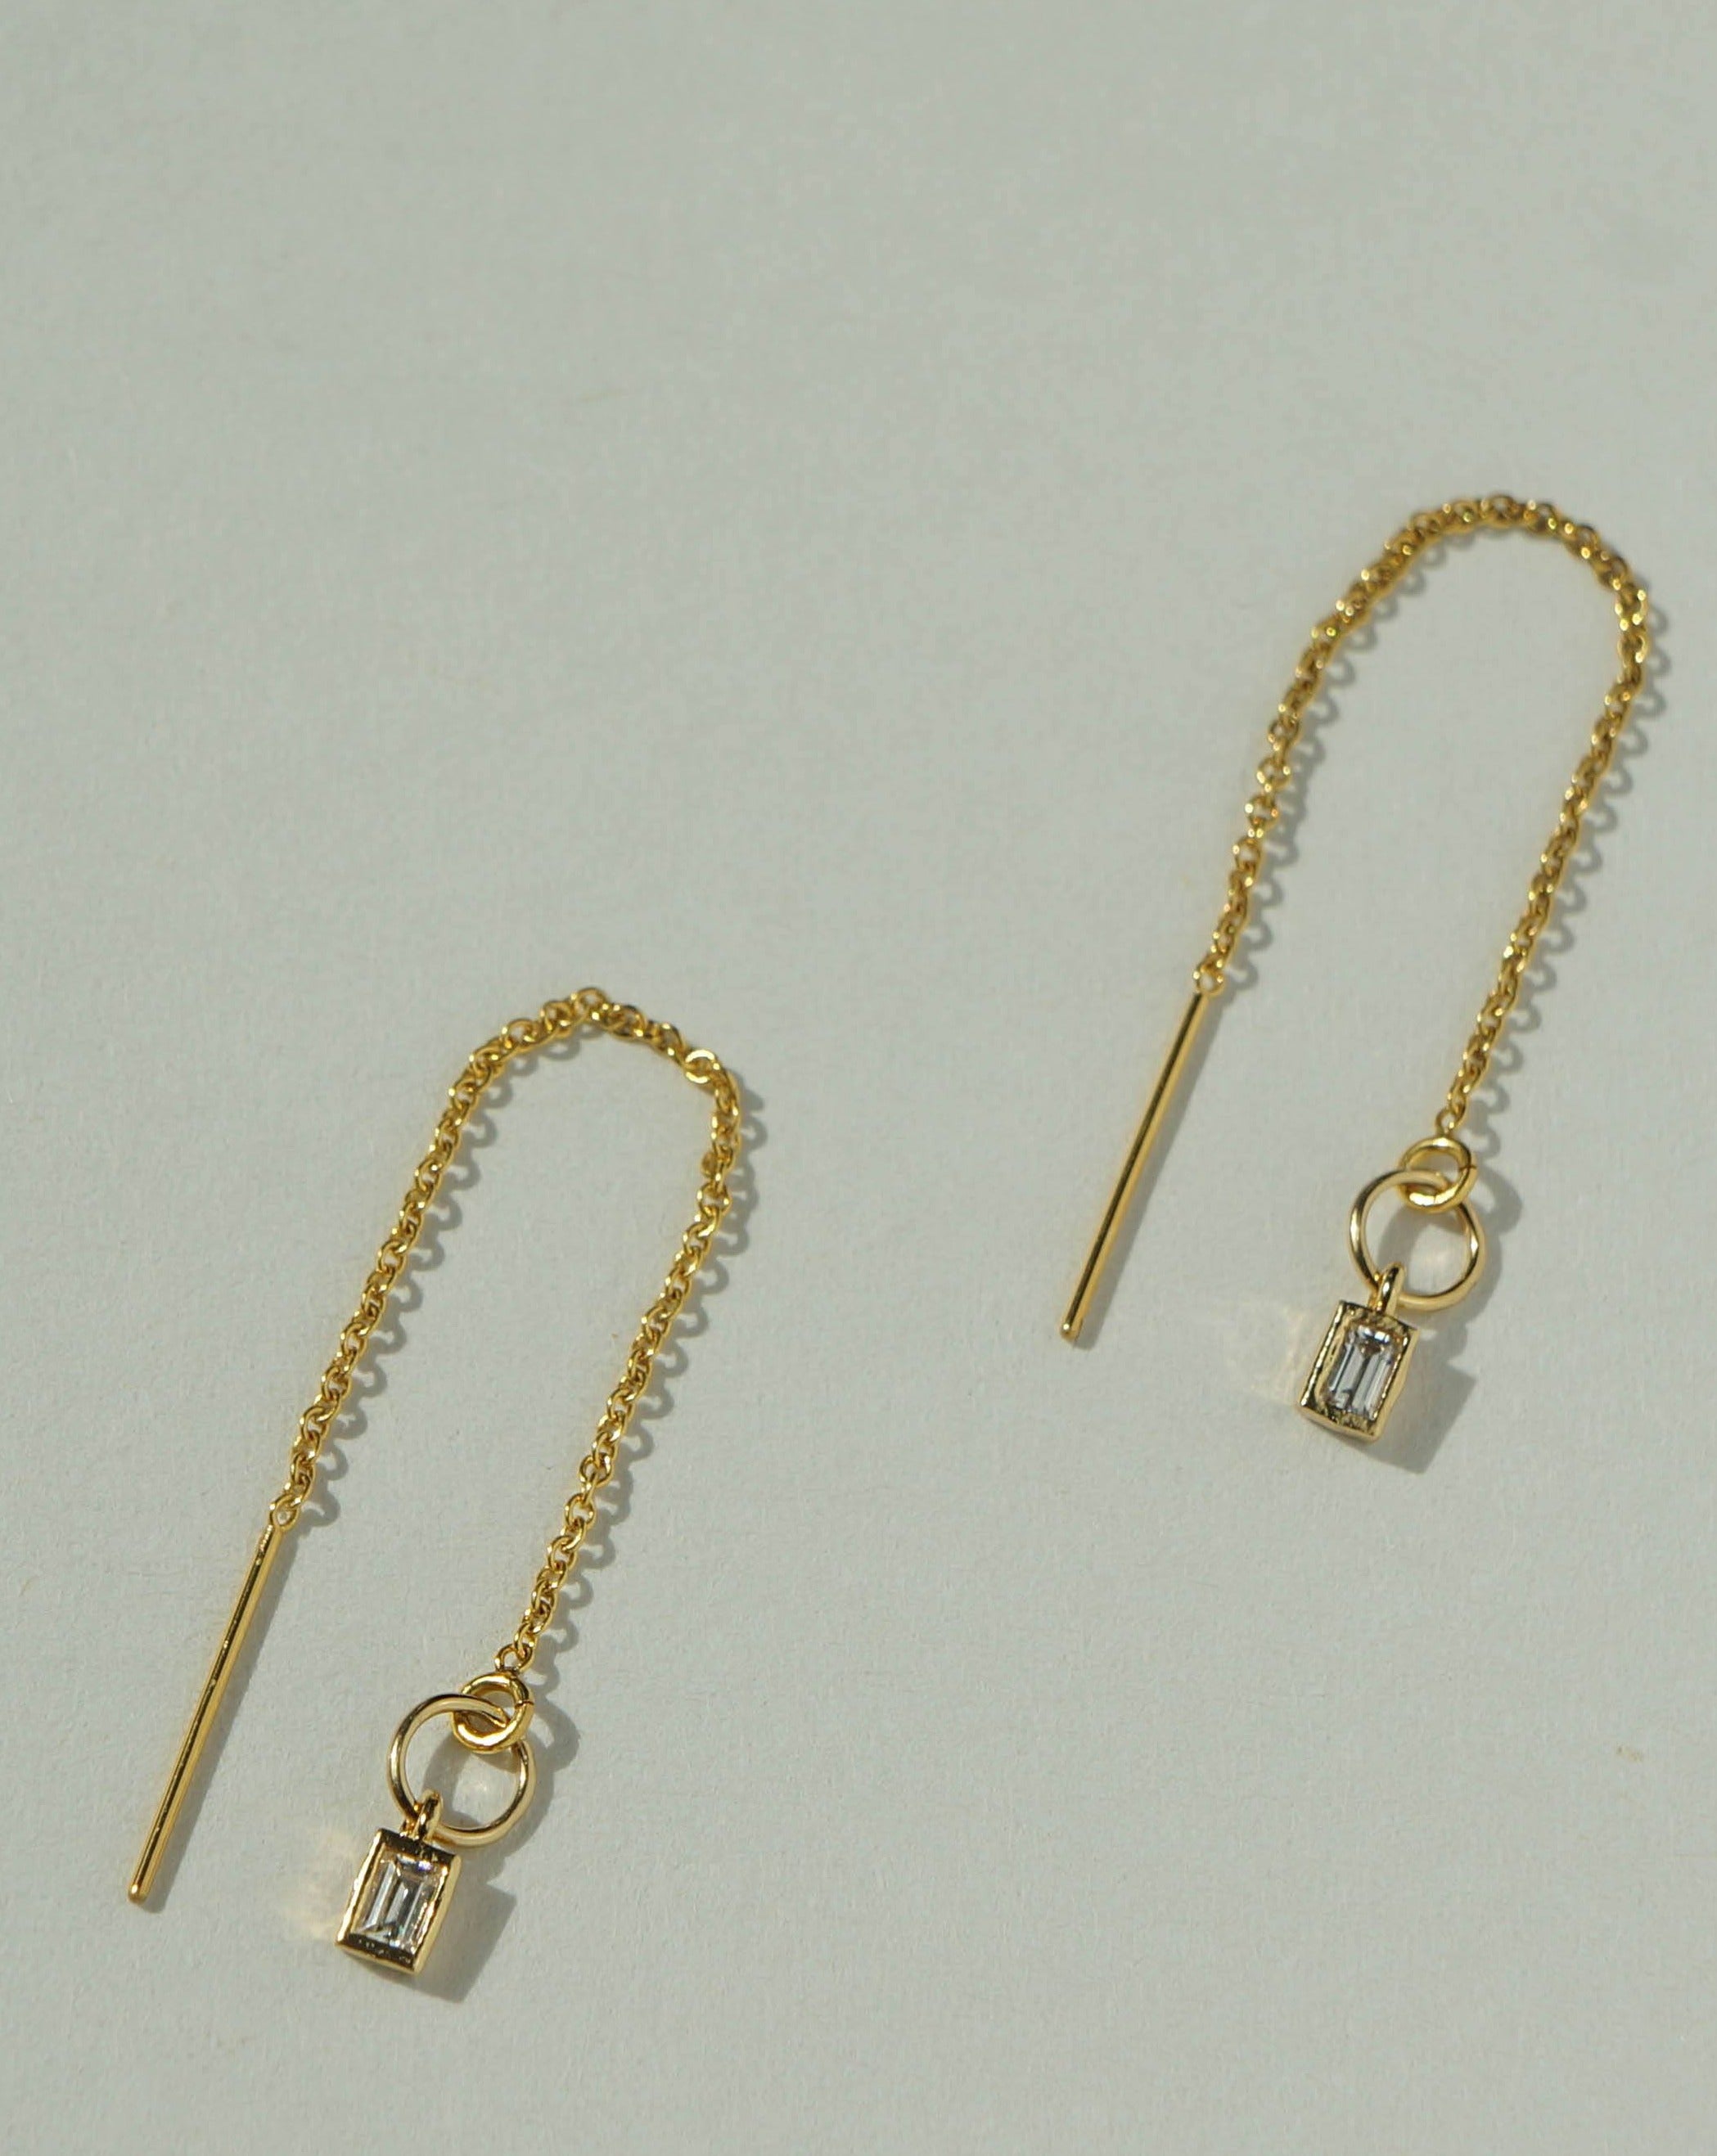 Grace Threaders by KOZAKH. Threader style earrings with drop length of 1 inch on both sides, crafted in 14K Gold Filled, featuring a square cut Cubic Zirconia.